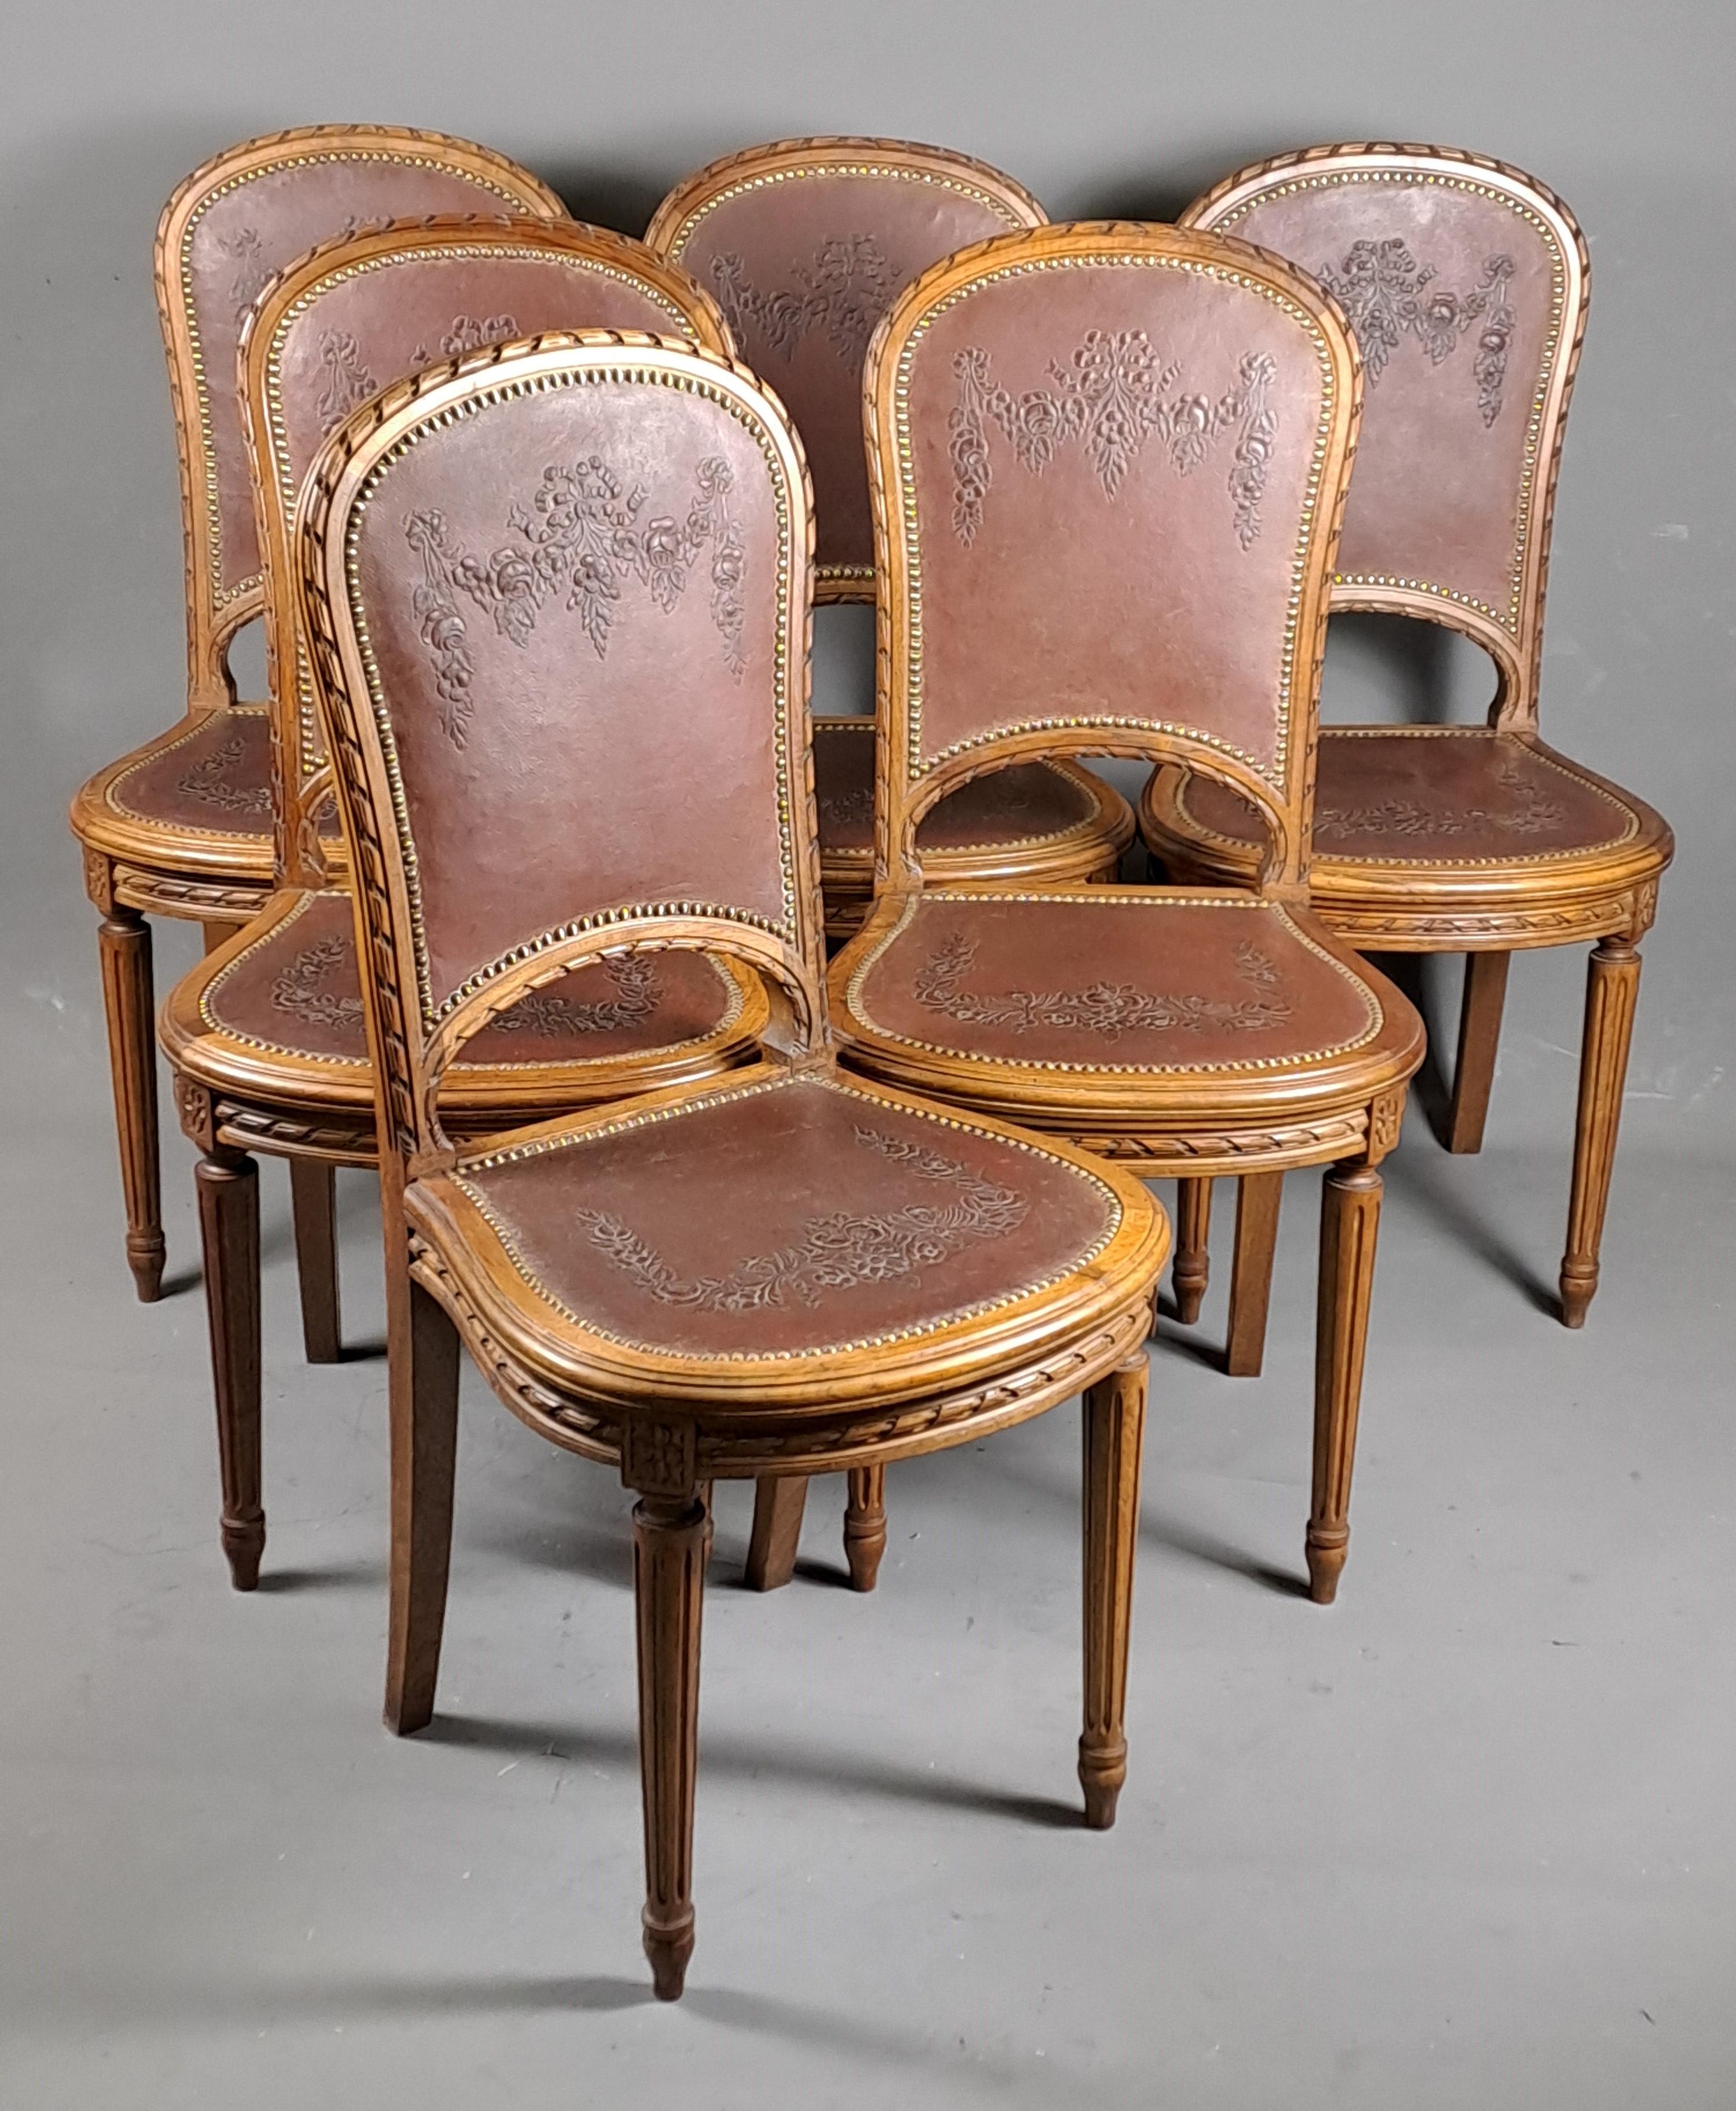 Beautiful series of 6 Louis XVI style chairs in very finely carved solid walnut and embossed Cordoba leather trim decorated with flower garlands.

French work around 1900

Very good condition, stable and healthy seats, leather in excellent condition